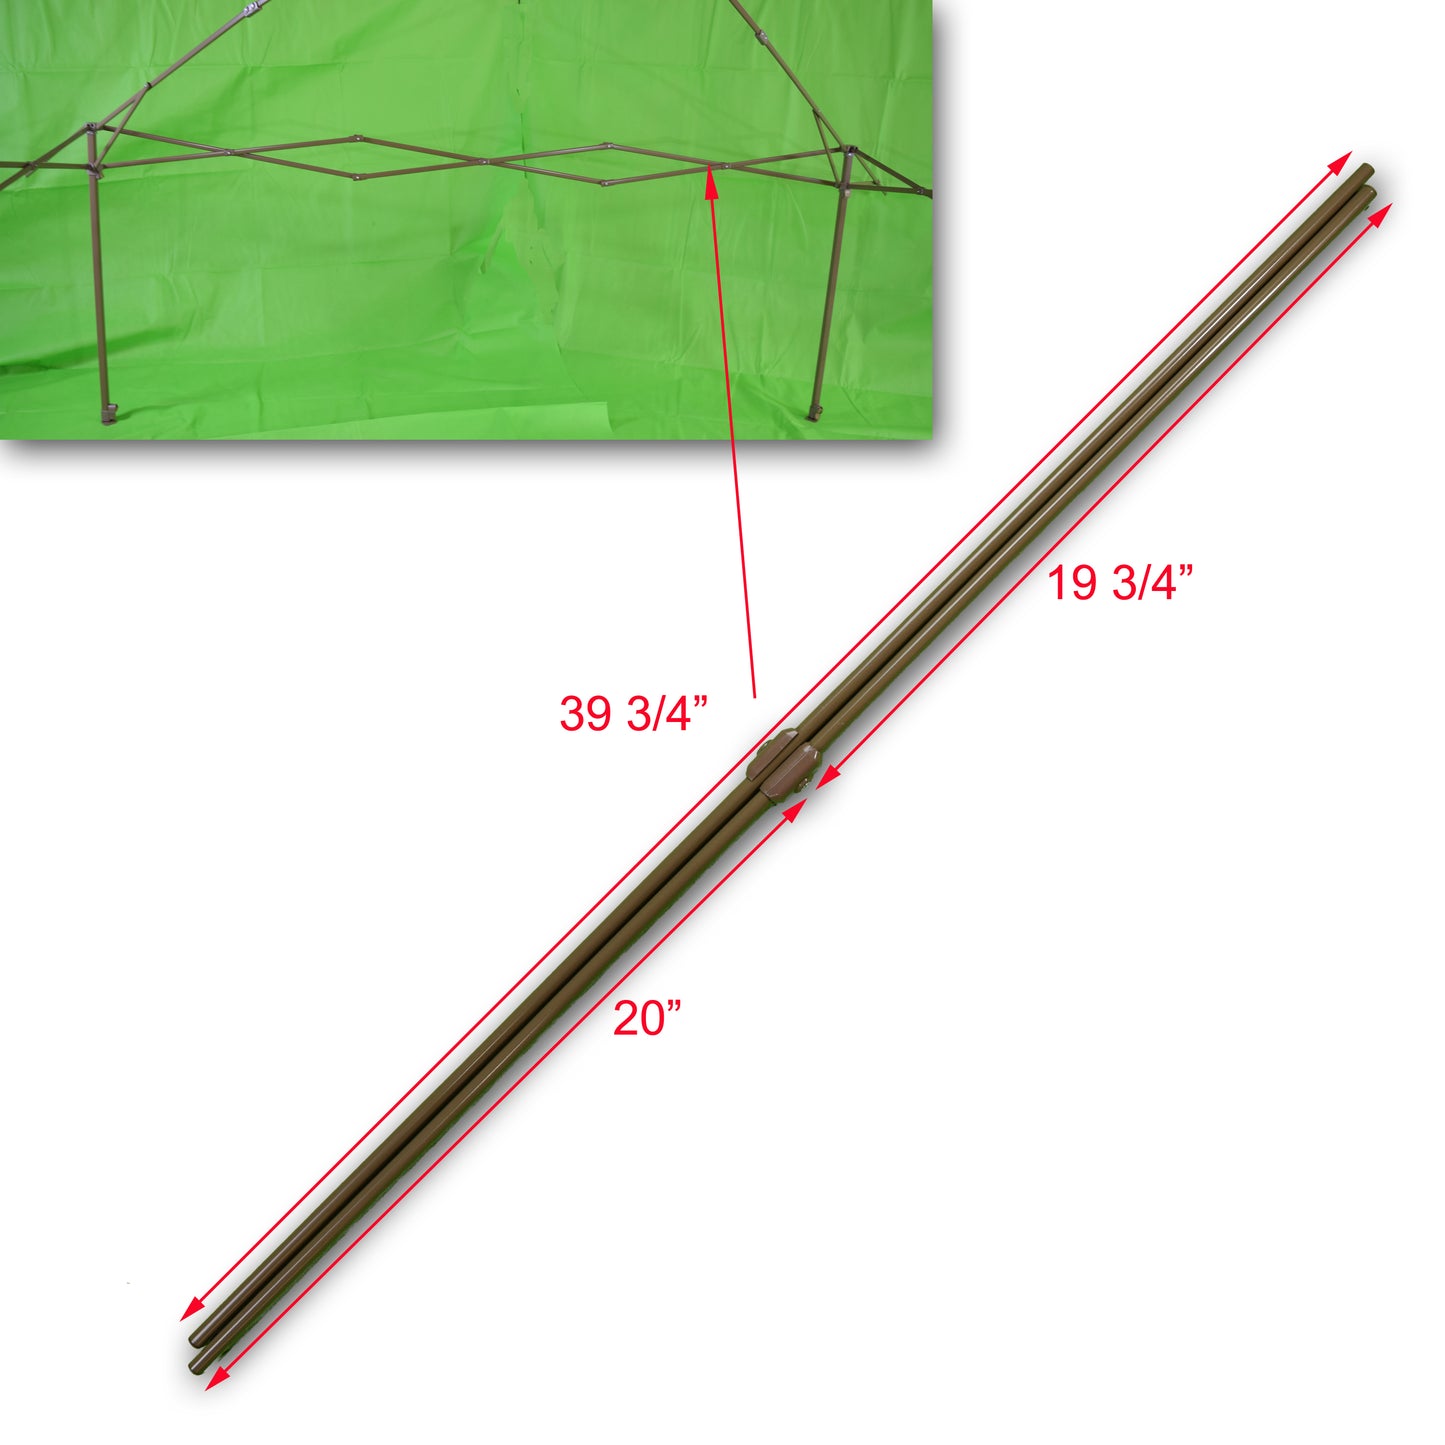 In this image, you can see a set of two brown canopy replacement parts, comprising cross bars, each with a length of 39 3/4 inches. These parts are custom-made for the Chapter 13 x 13 Straight Leg Canopy, providing essential support and durability.